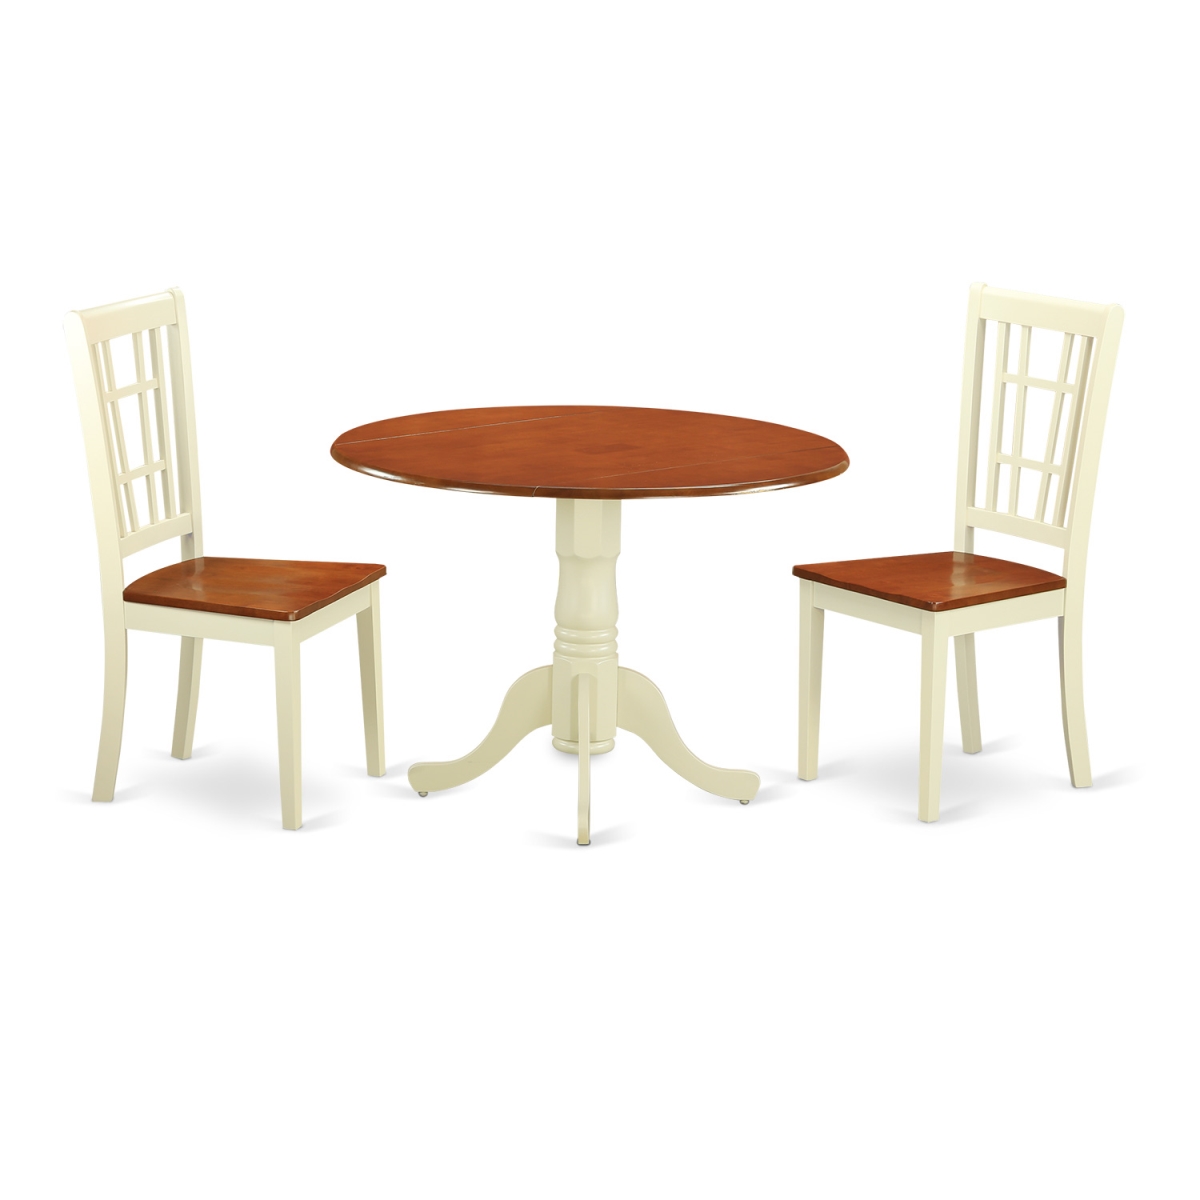 Picture of East West Furniture DLNI3-BMK-W Dinette Set with 2 Table & 2 Chairs, Buttermilk & Cherry - 3 Piece